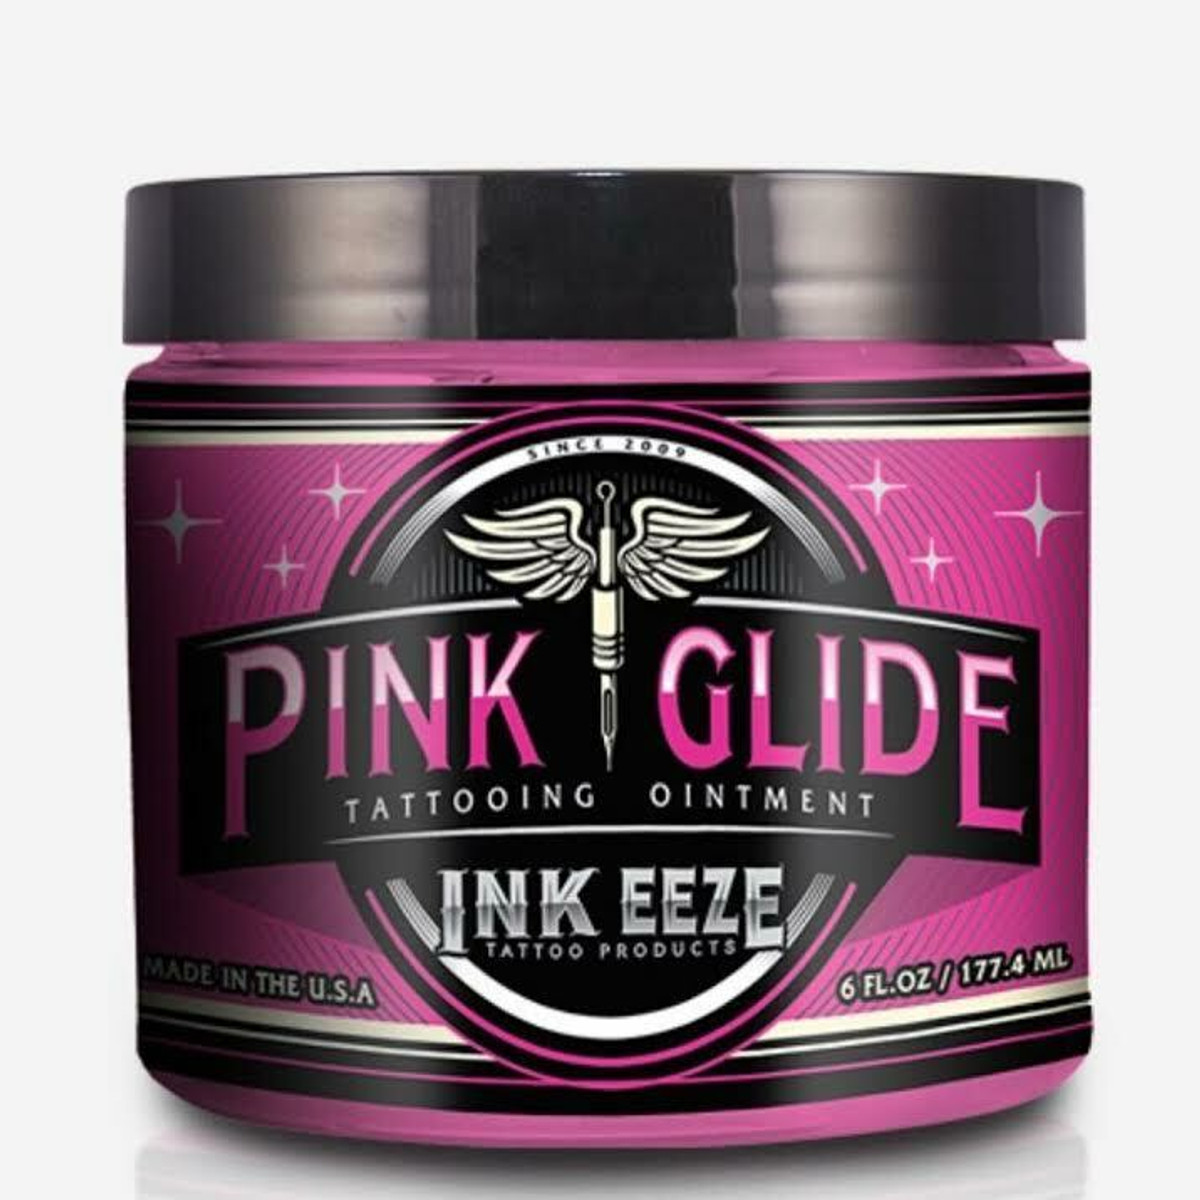 INK-EEZE Pink Glide Tattoo Ointment 6oz